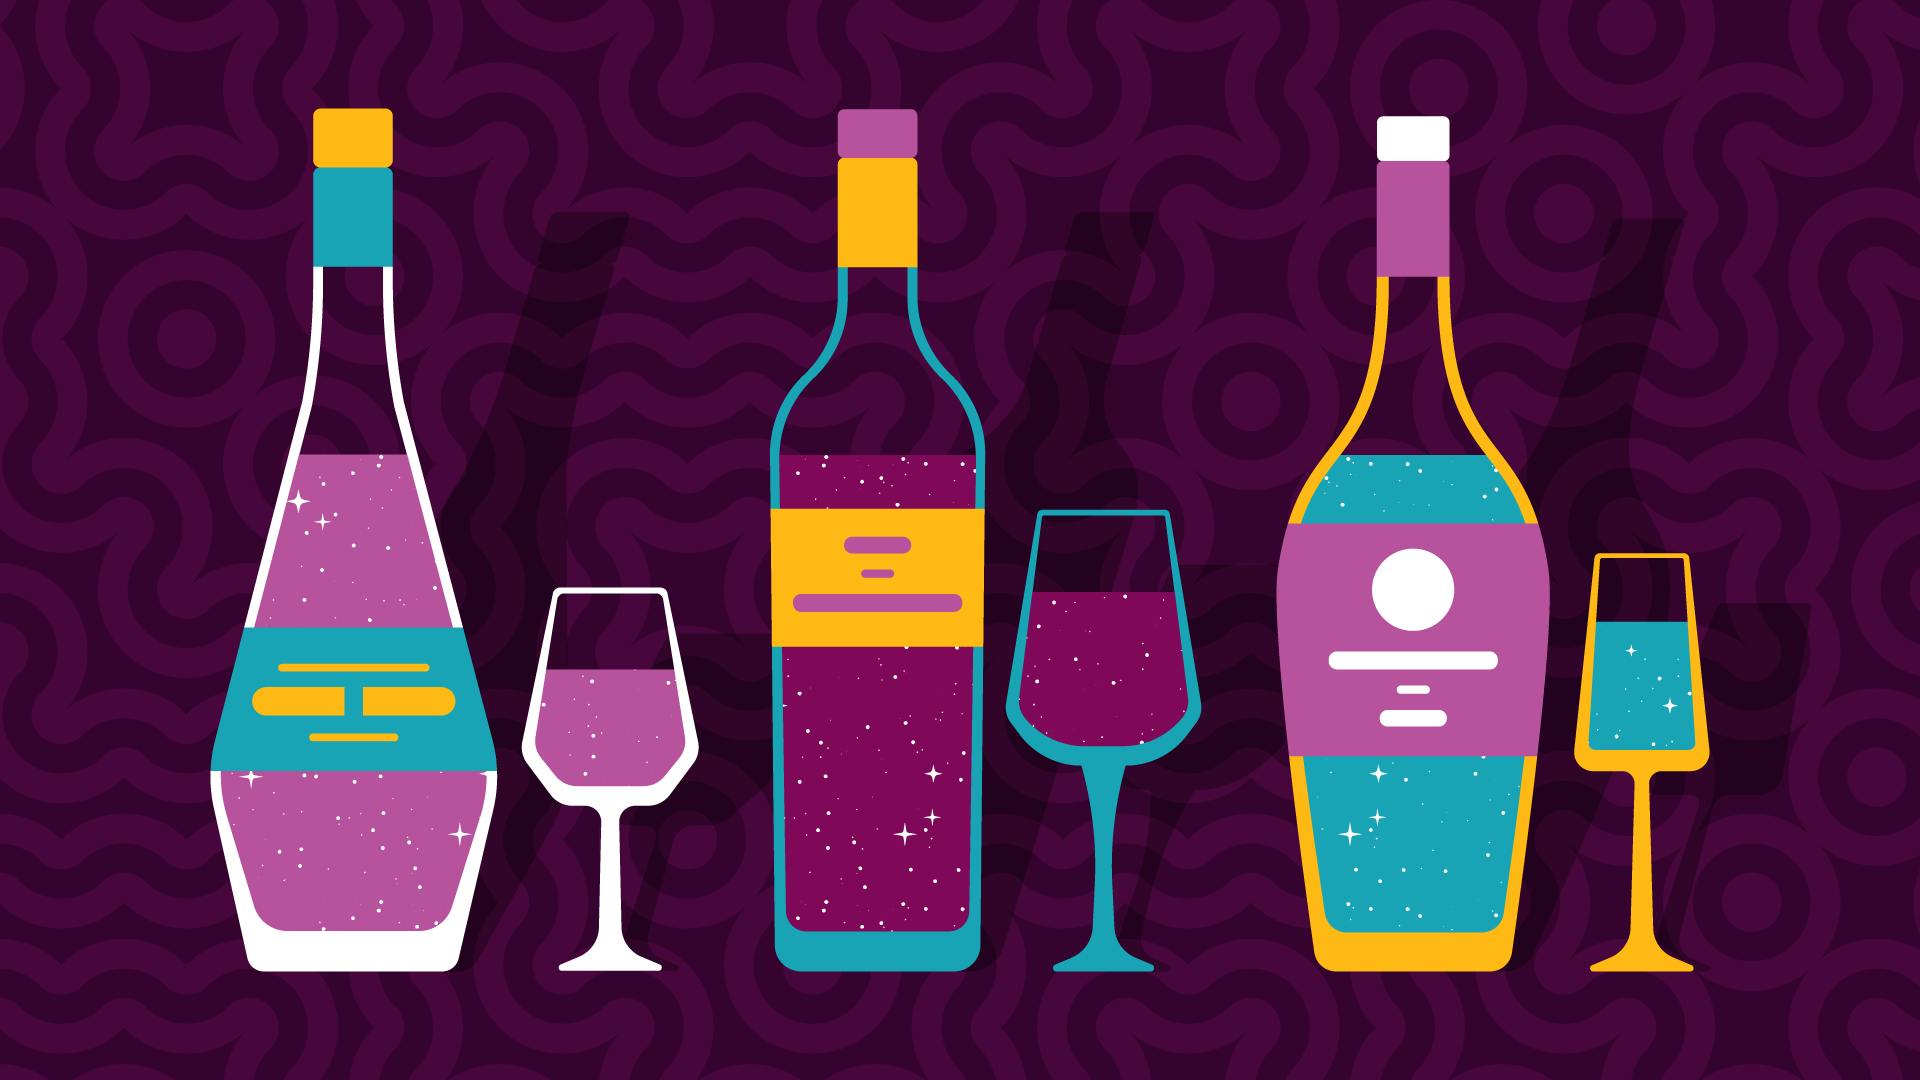 Graphic illustration of several wine bottles and glasses of wine